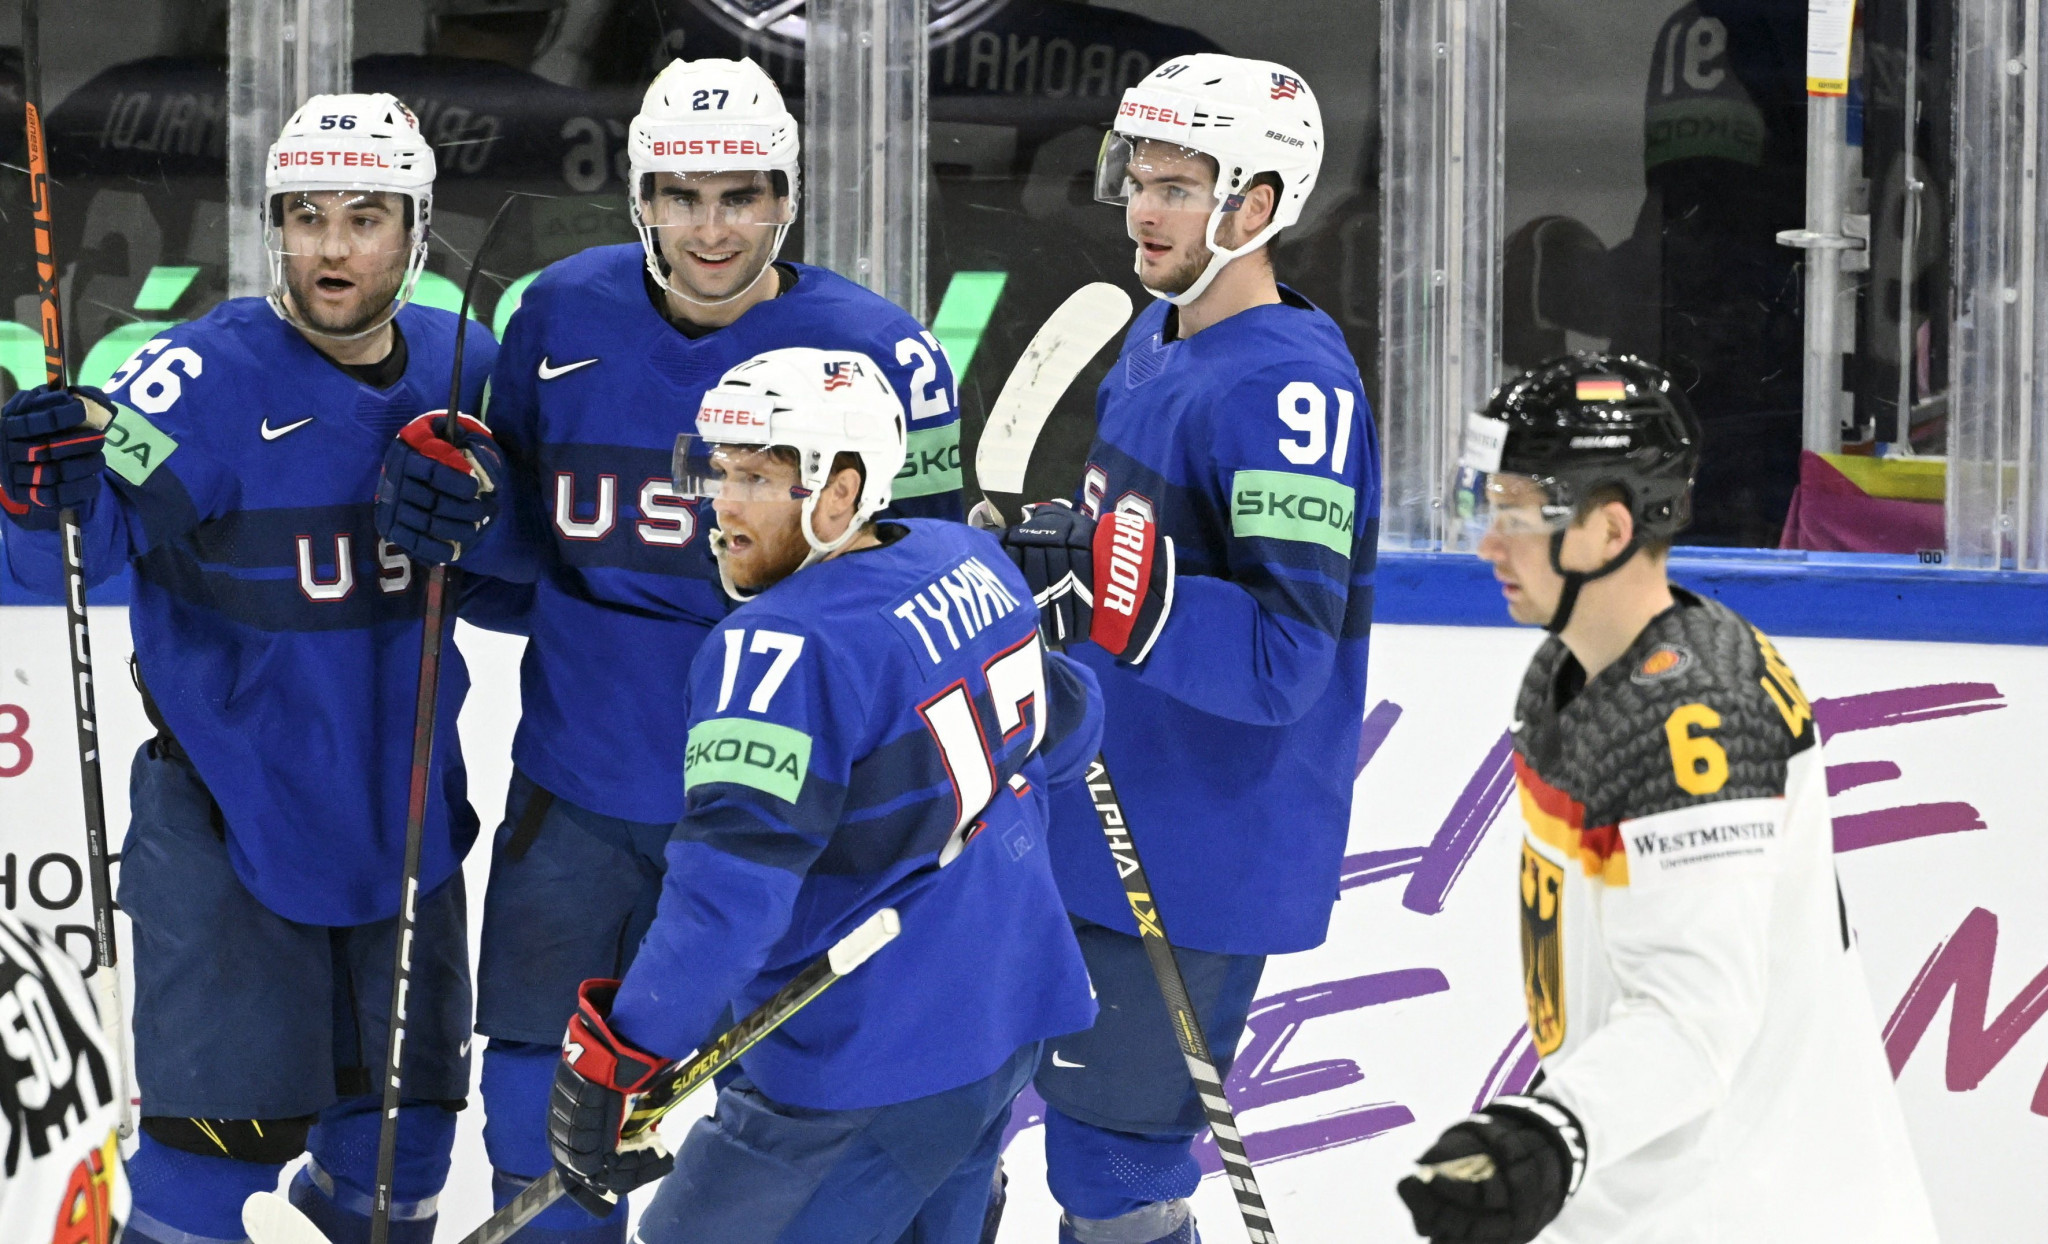 Matt Coronato, second left, scored the winning goal for the United States as they came from behind to beat Germany 3-2 in Tampere ©Getty Images